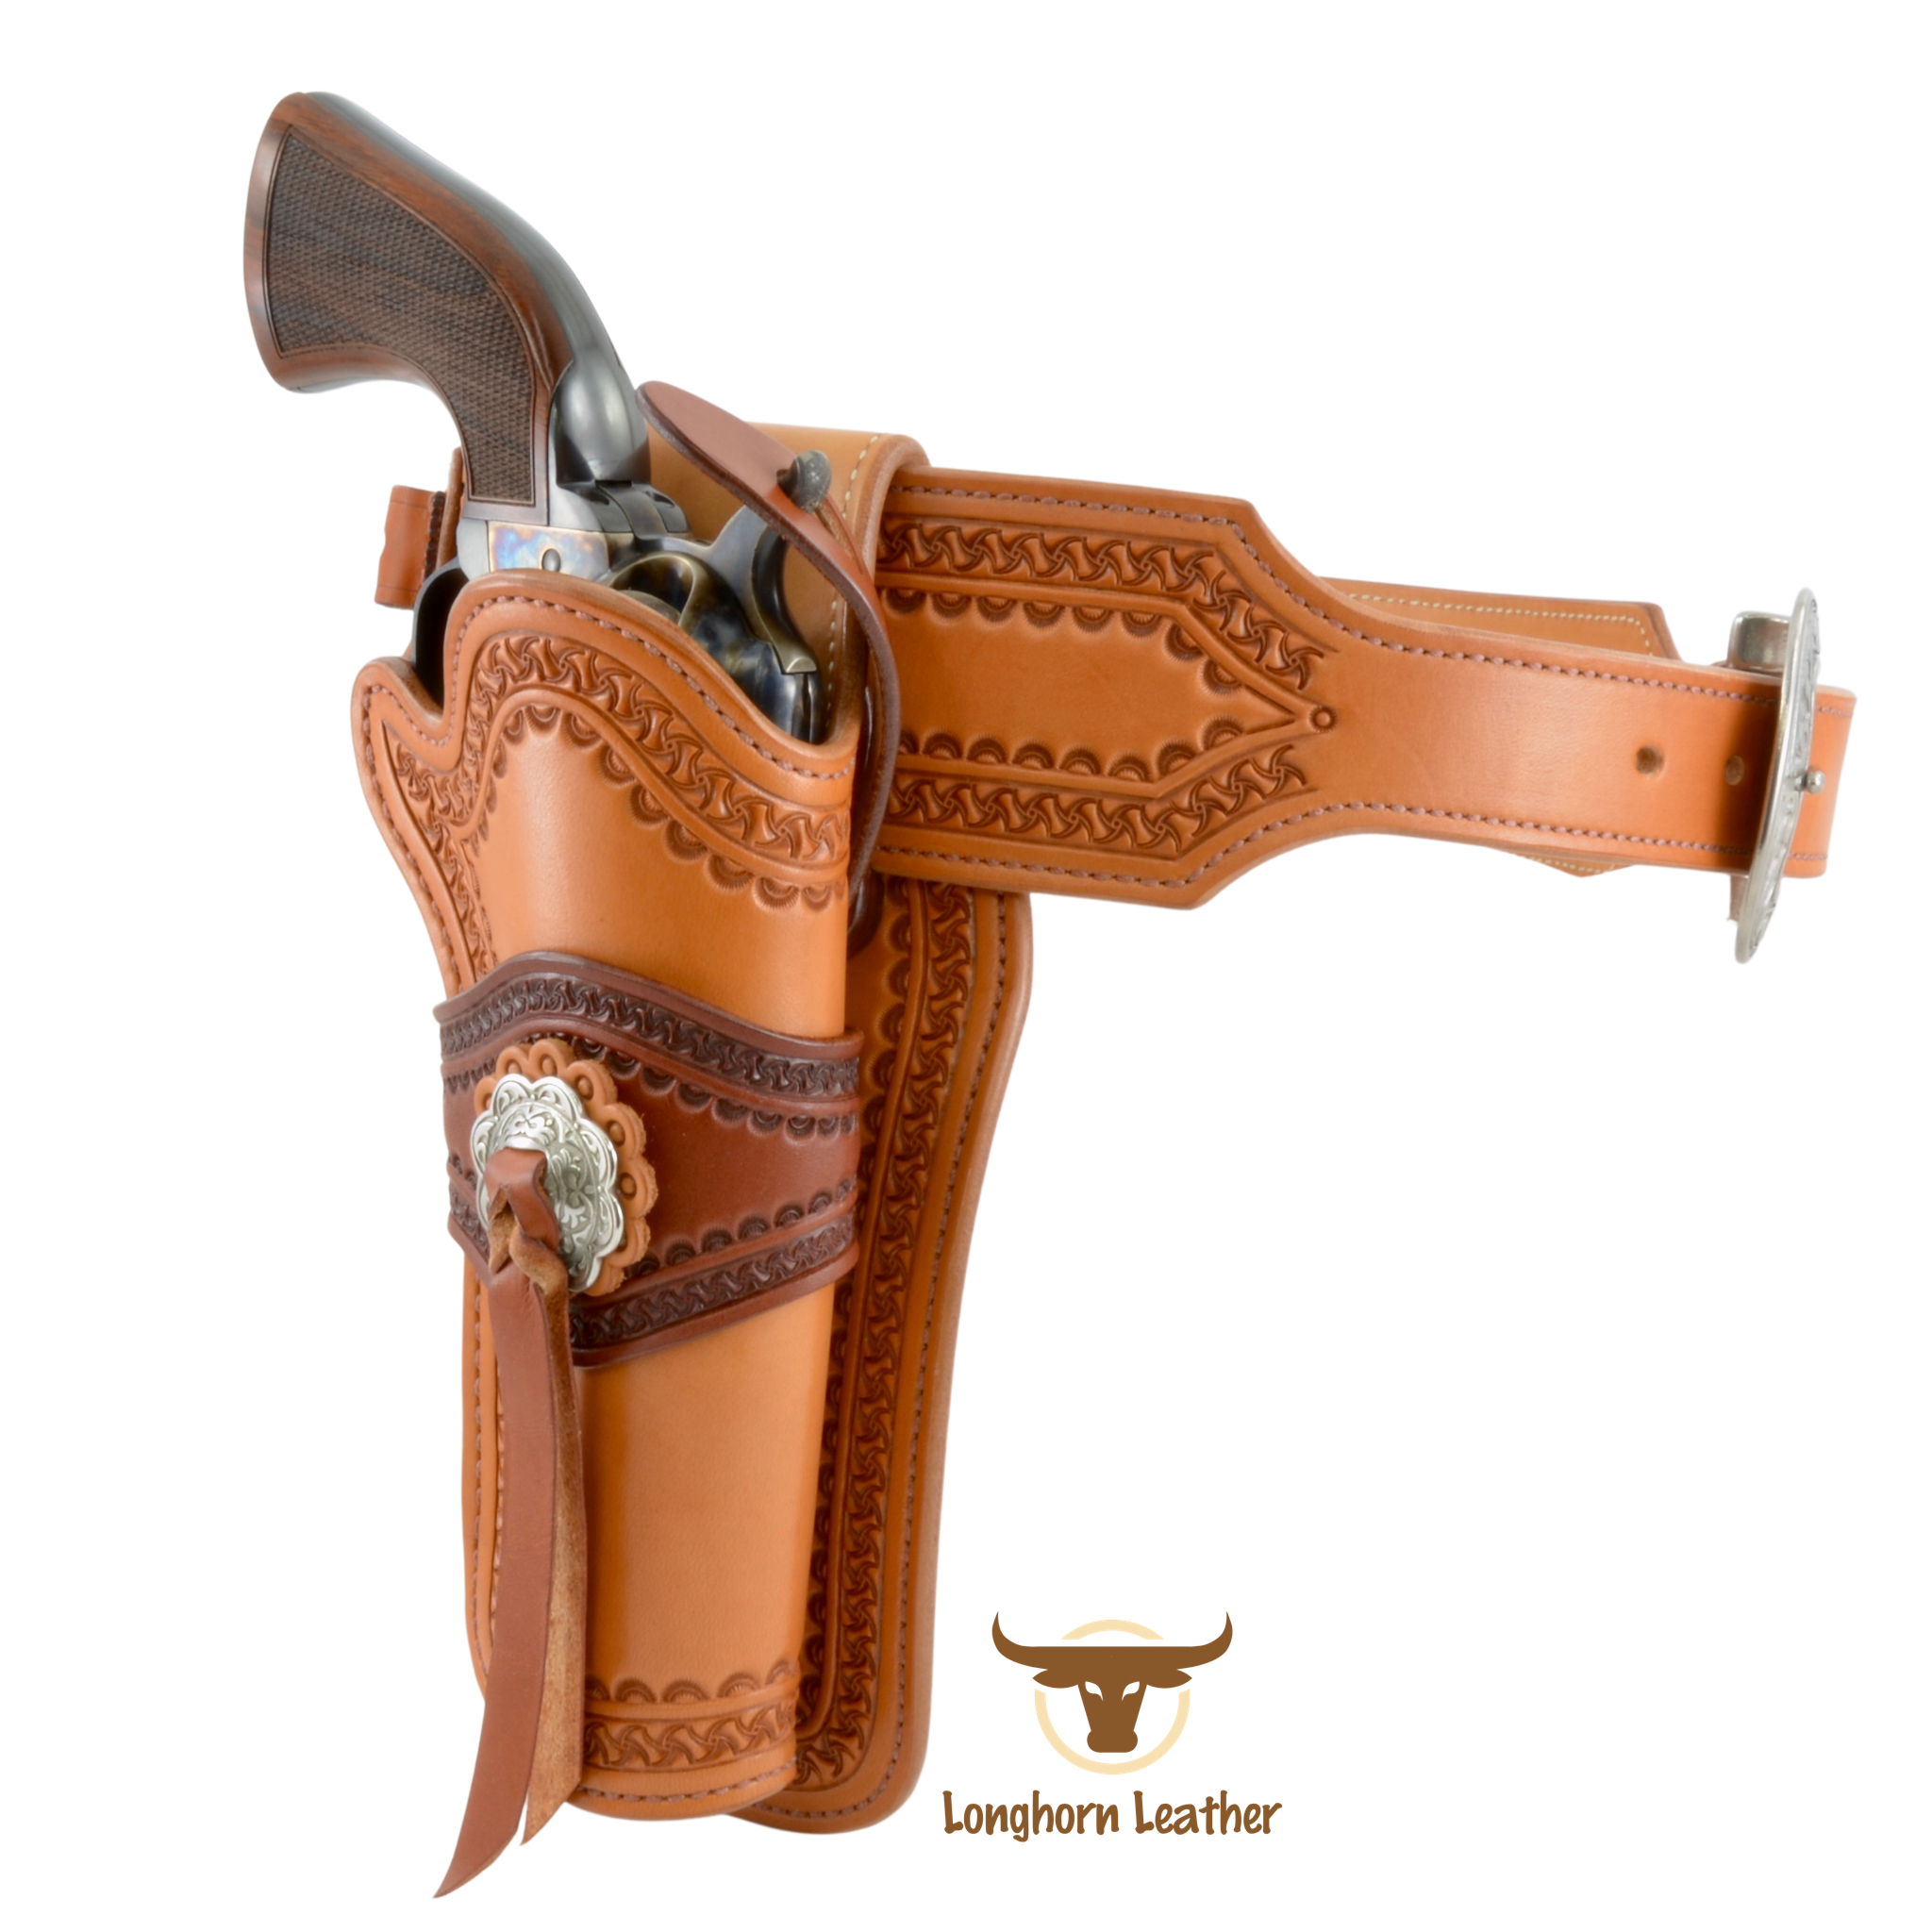 Longhorn Leather AZ-We specialize in custom leather single action holsters.  Our holsters are individually handcrafted to deliver the highest level of  quality and performance.